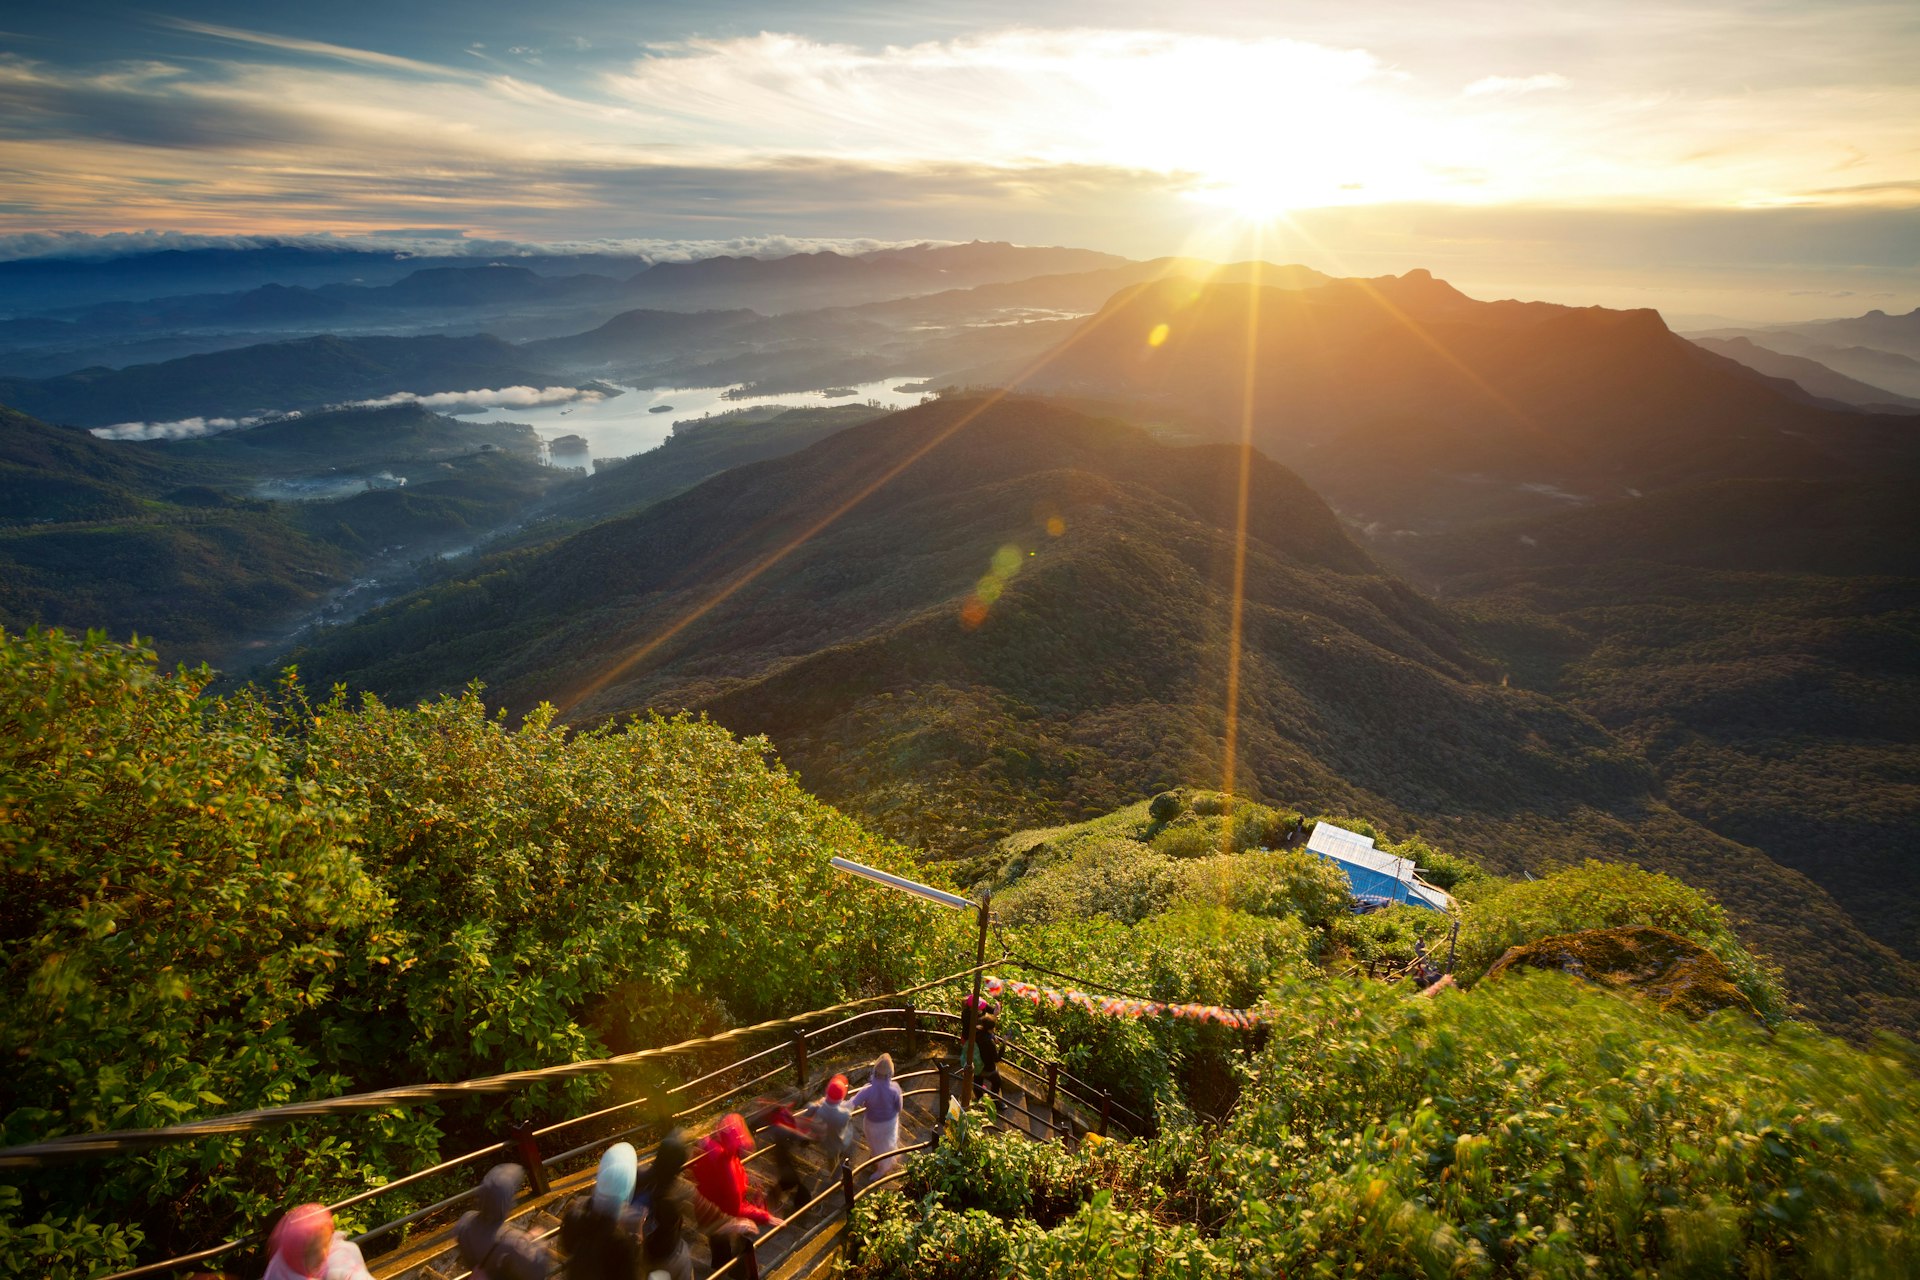 Valley view with villages and mountains at sunrise. View from Adam's peak.